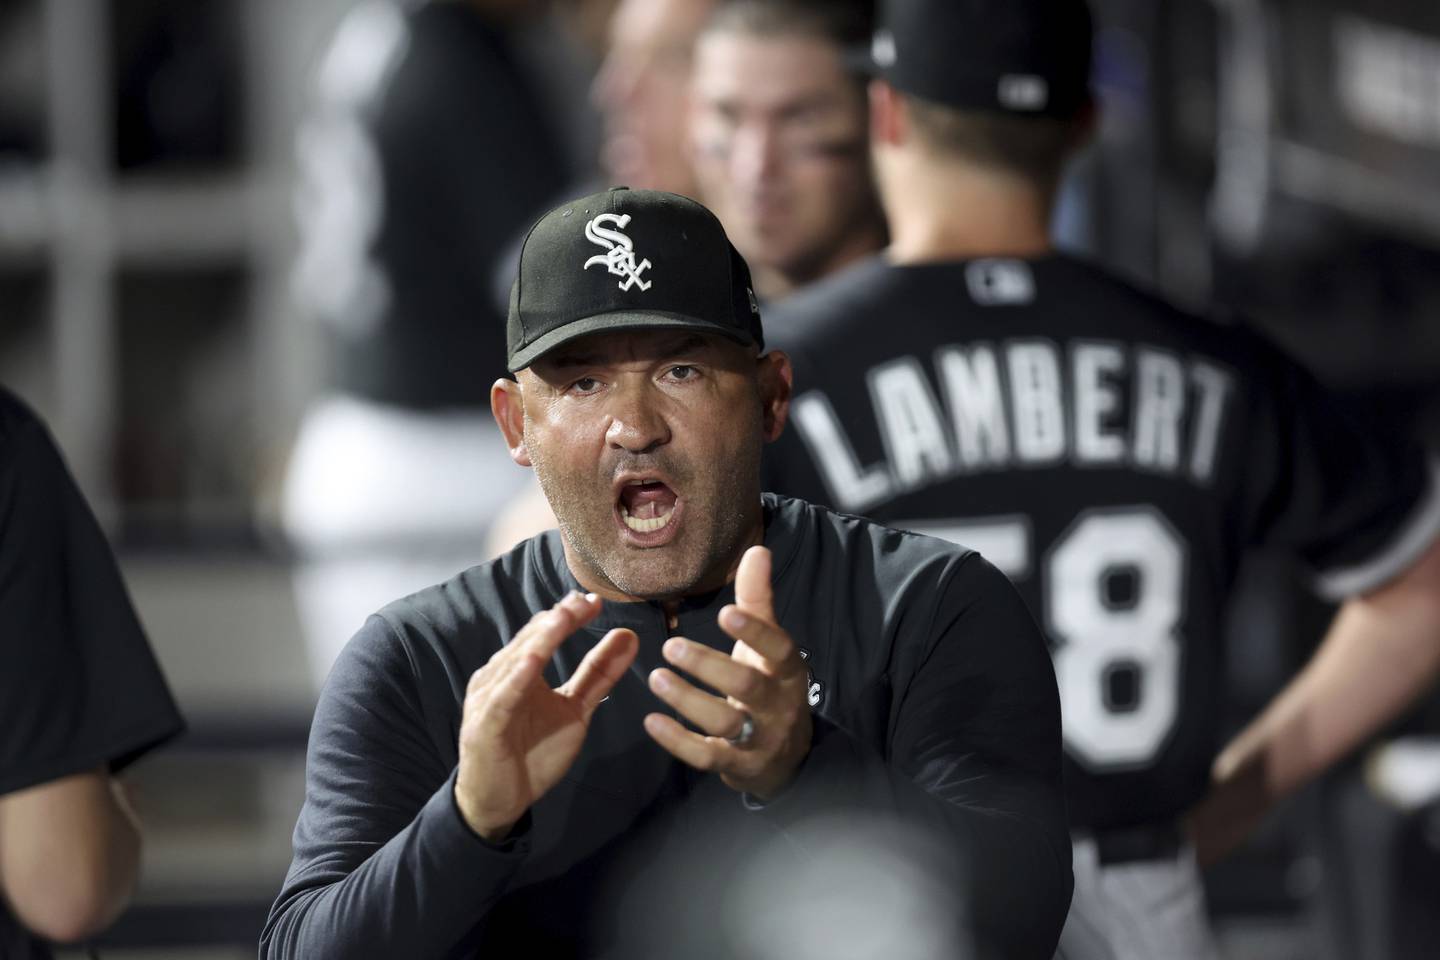 White Sox acting manager Miguel Cairo encourages his team against the Rockies on Sept. 13, 2022, at Guaranteed Rate Field.